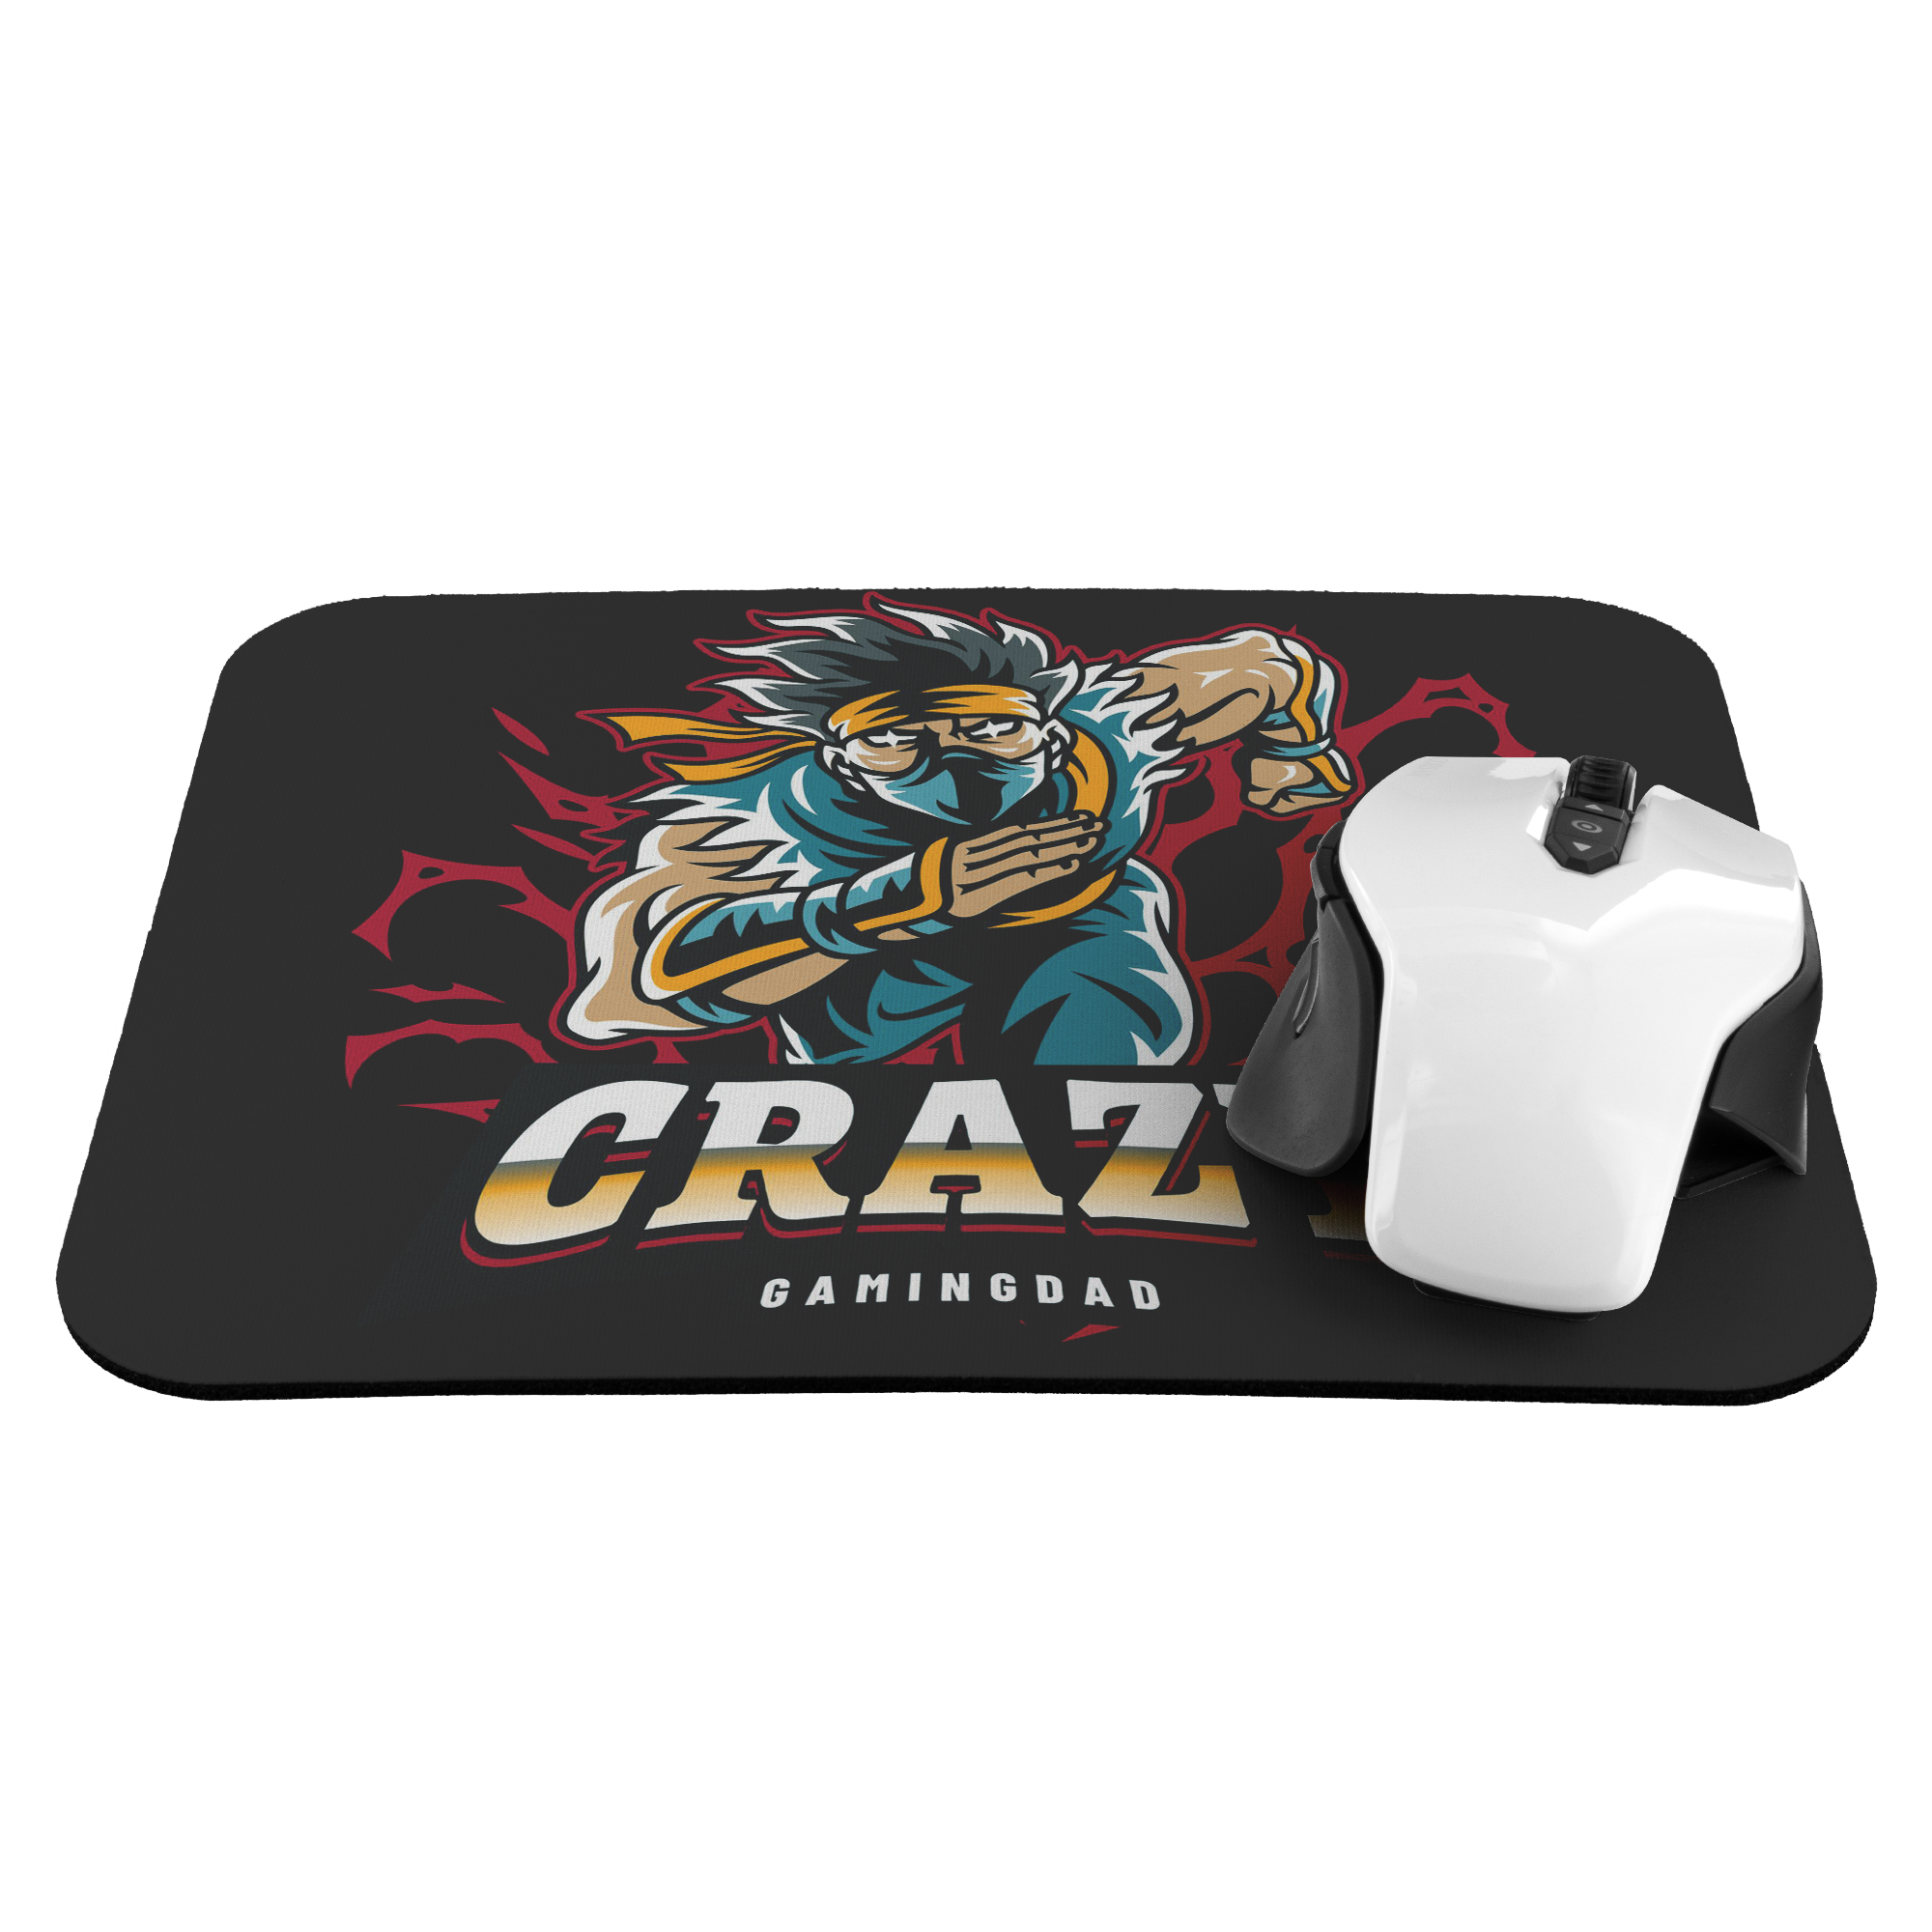 s-cgd MOUSE PAD